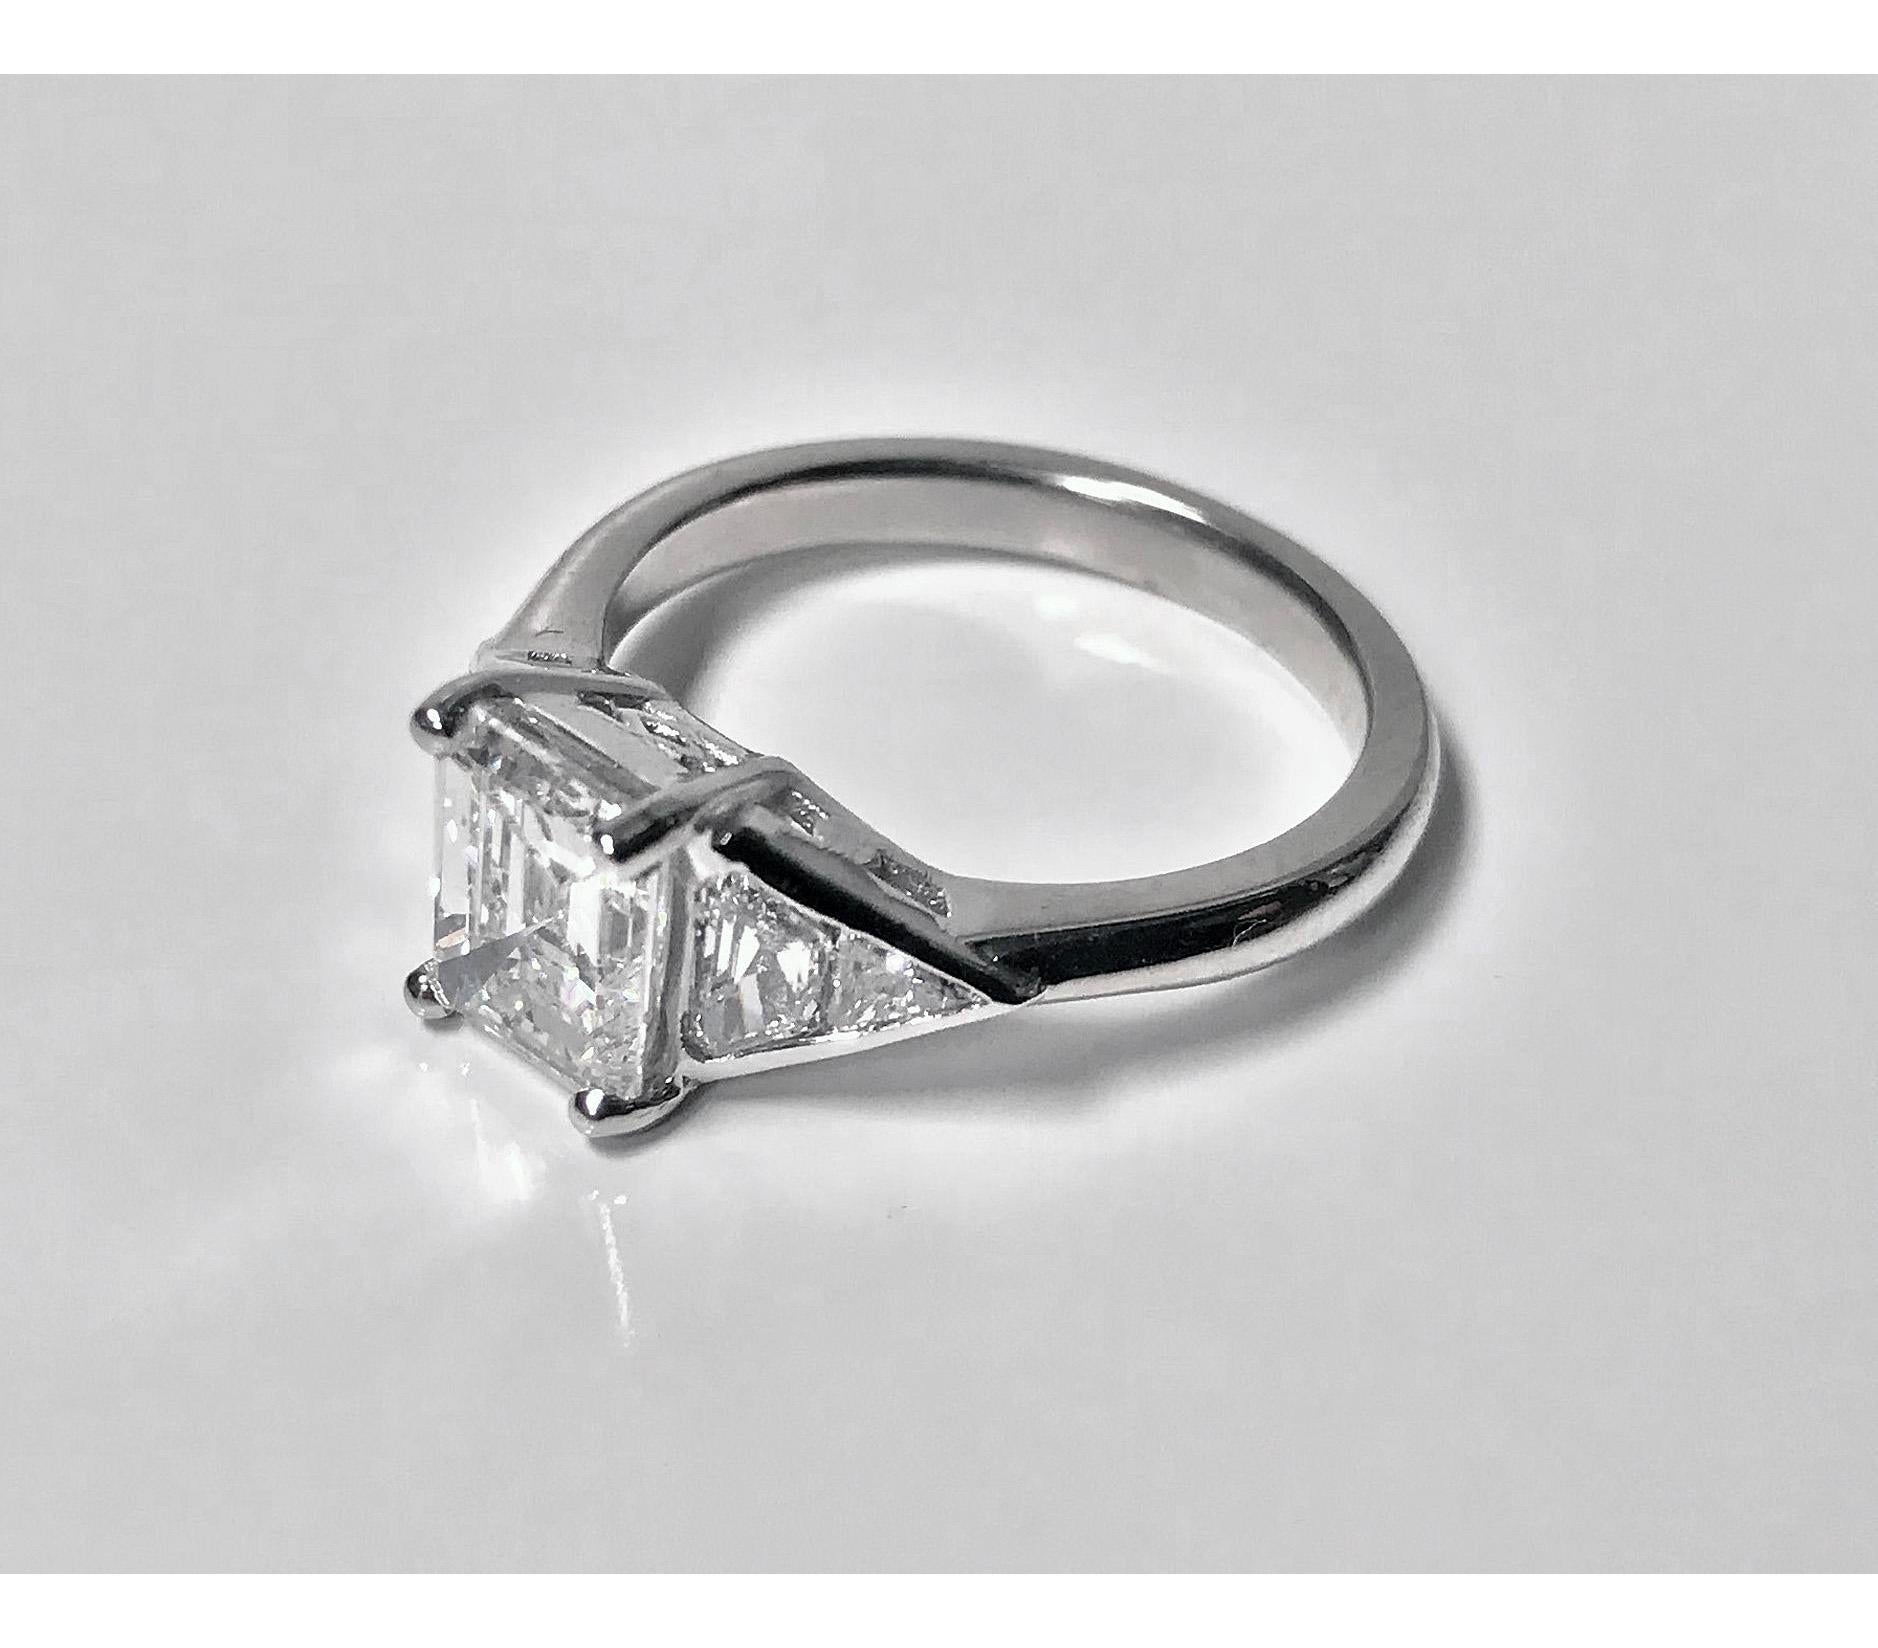 Ladies Diamond Ring mounted in Platinum. The custom hand made Ring set with an , gauging 7.60 x 6.40 x 3.90mm, approximately 1.61 cts, approximately SI1 clarity, approximately G colour, flanked on either side with a triangular and trapeze cut